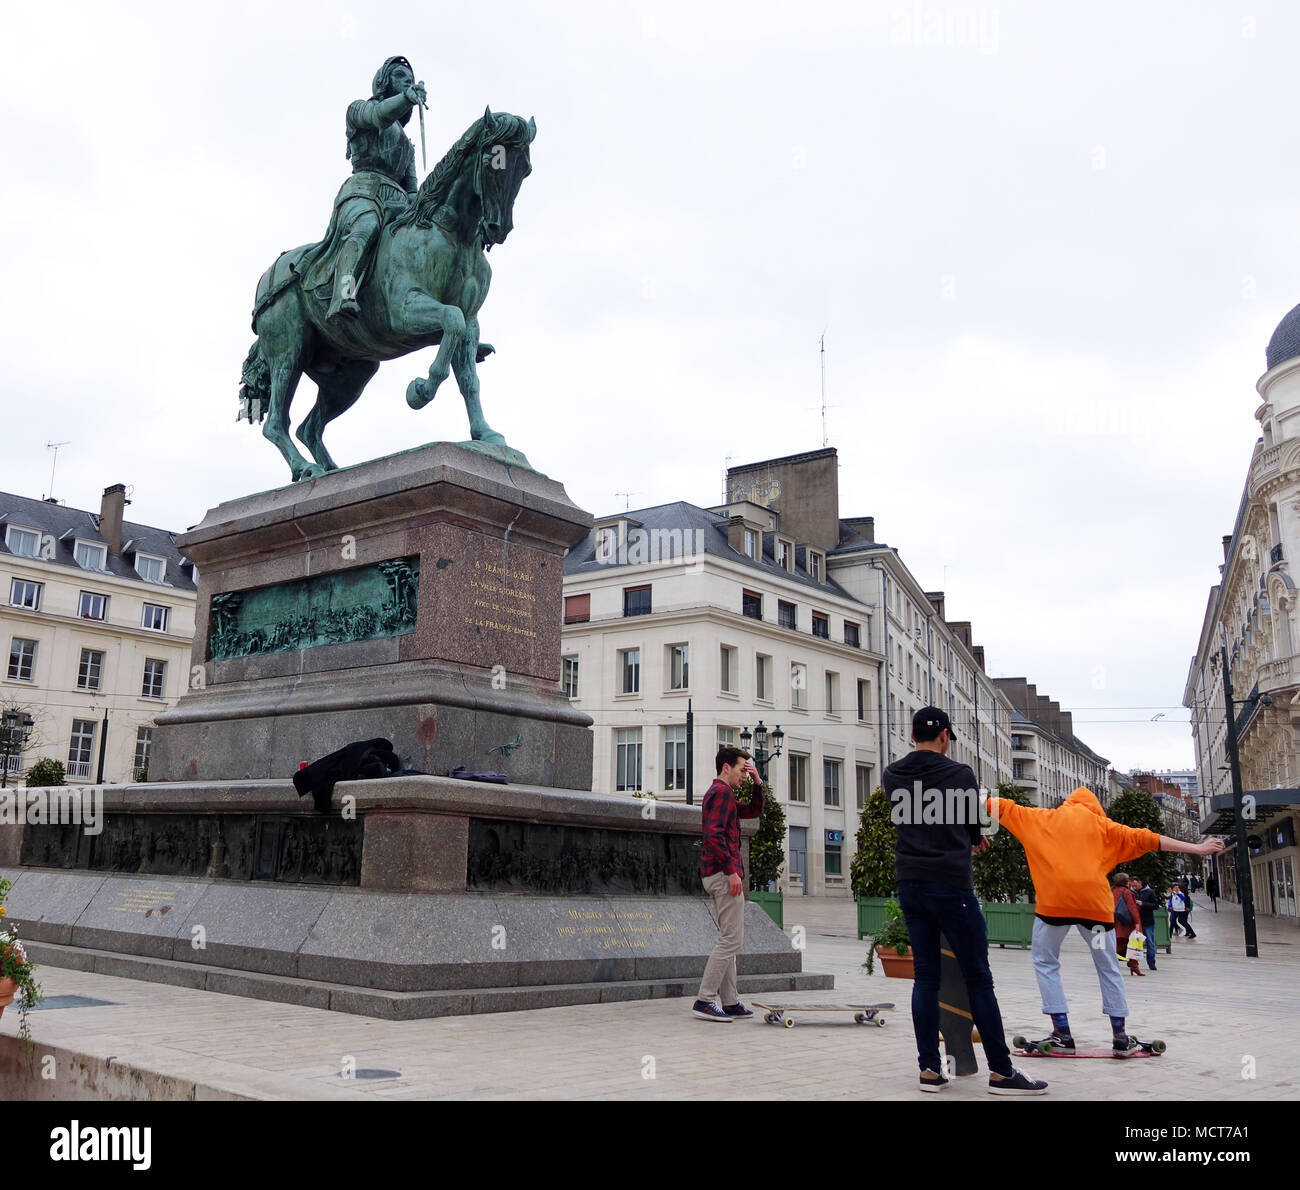 Joan of Arc statue and boys skate boarding on Orleans city Centre, France Stock Photo